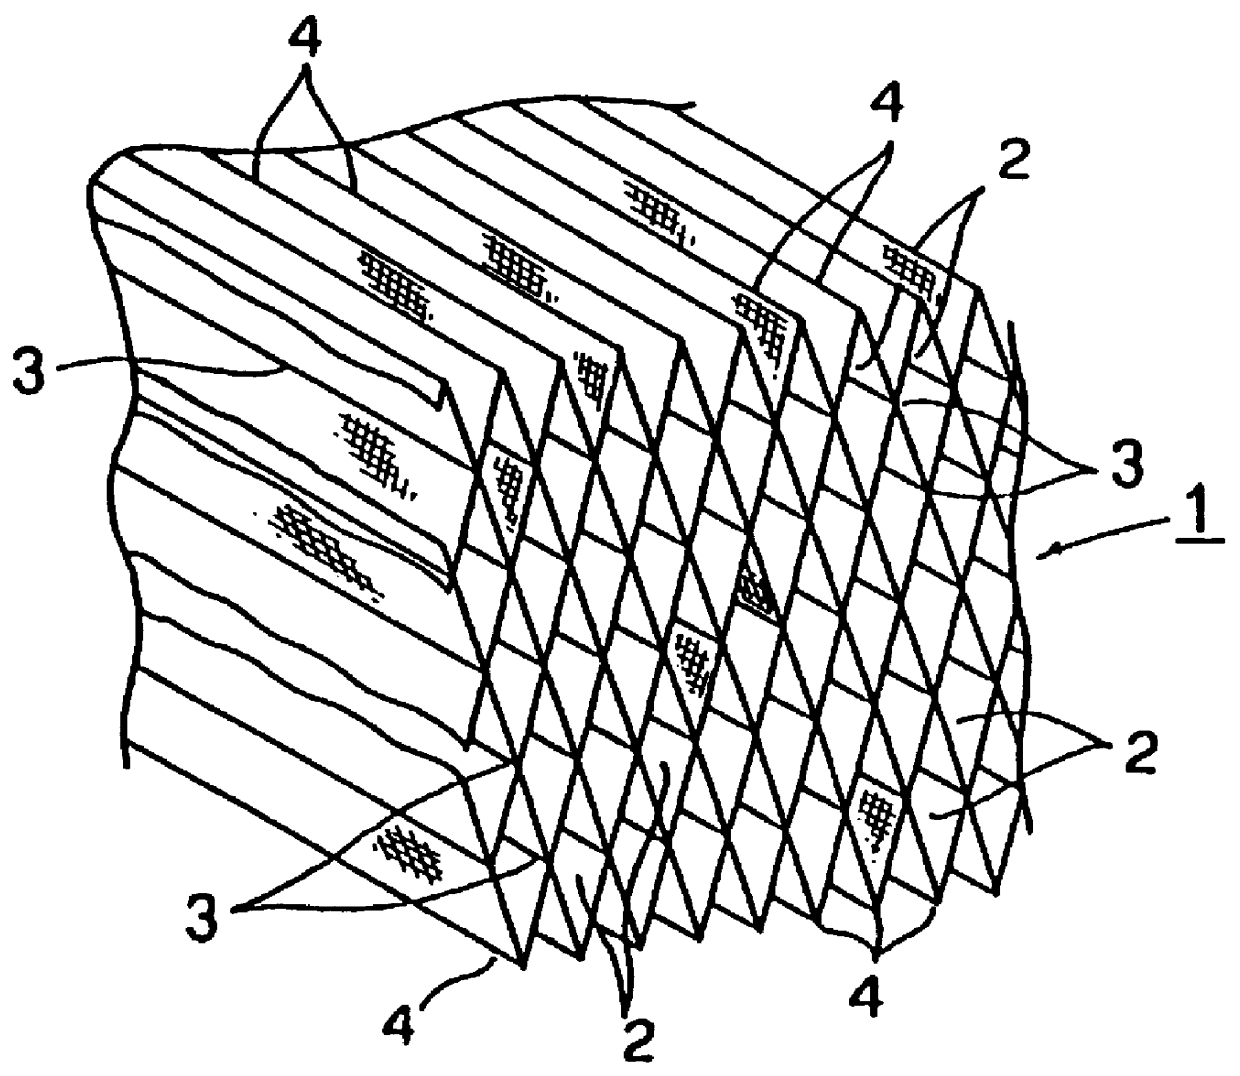 Three-dimensional woven fabric structural material and method of producing same